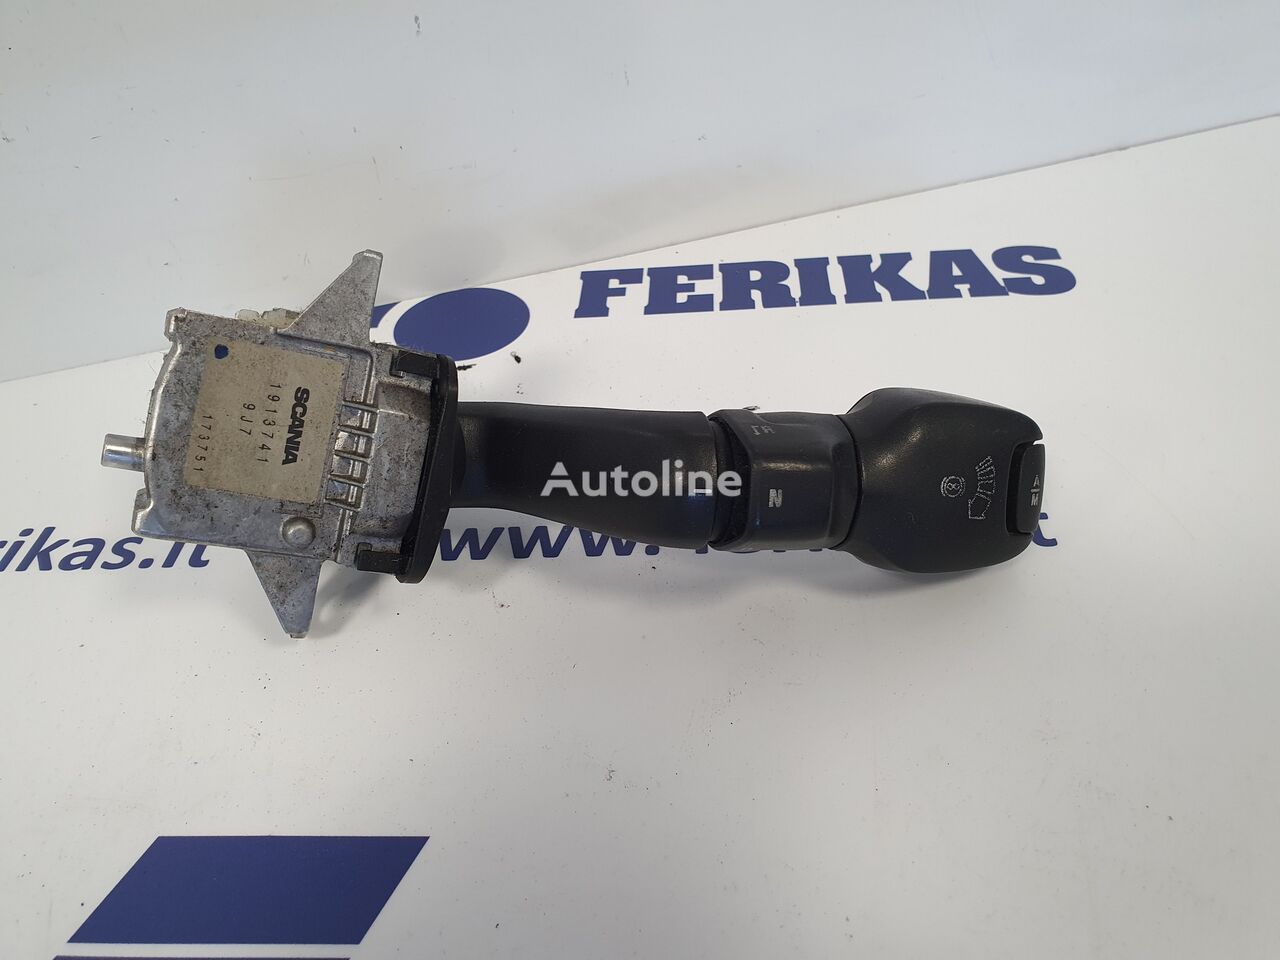 Scania gear lever / retarder switch 1913741, 1548289 understeering switch for Scania R truck tractor